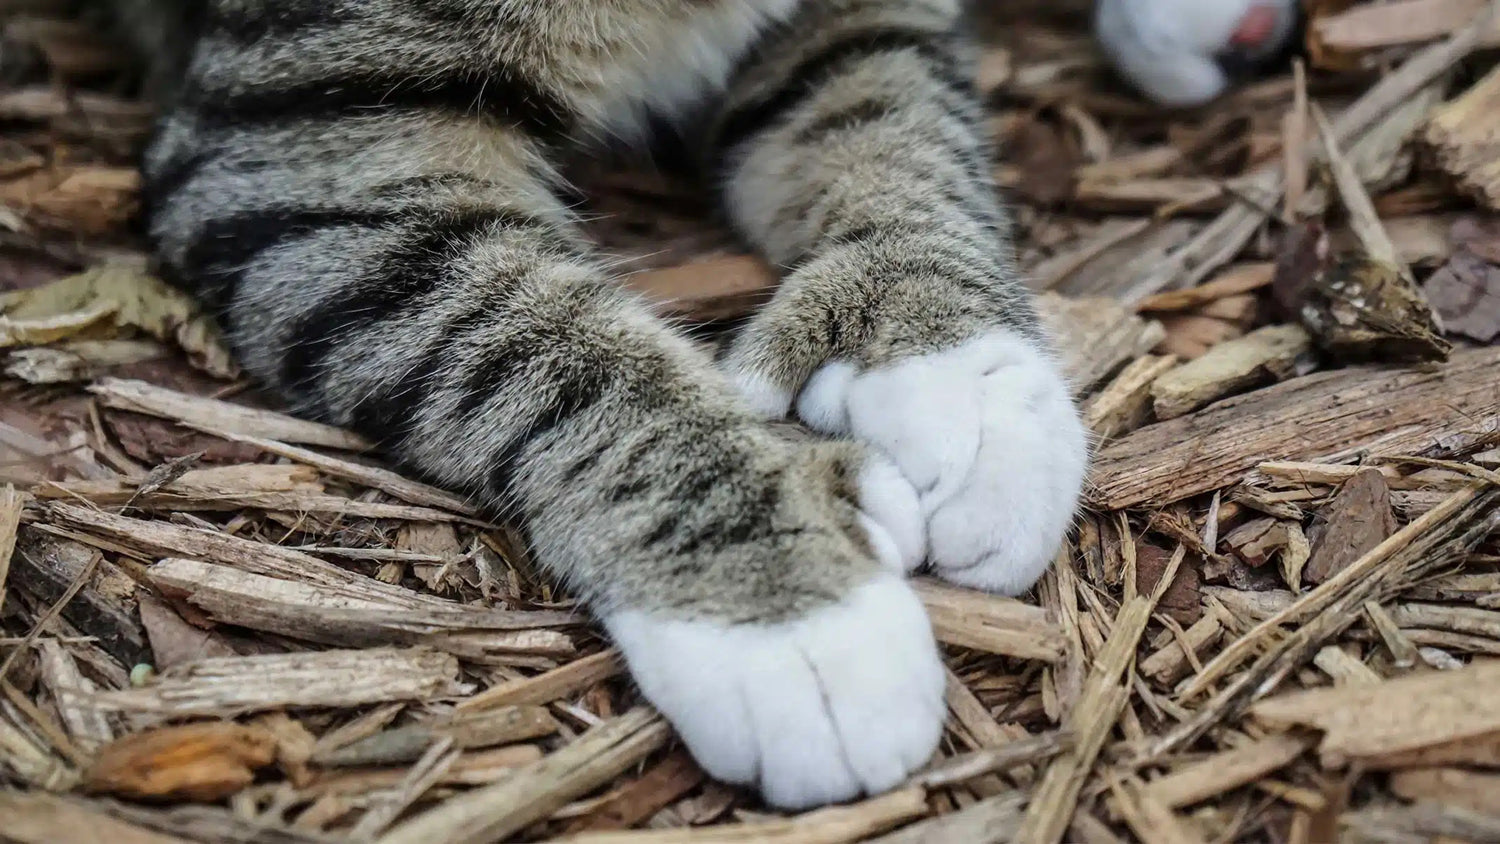 Feline feet: 10 fun facts about polydactyl cats